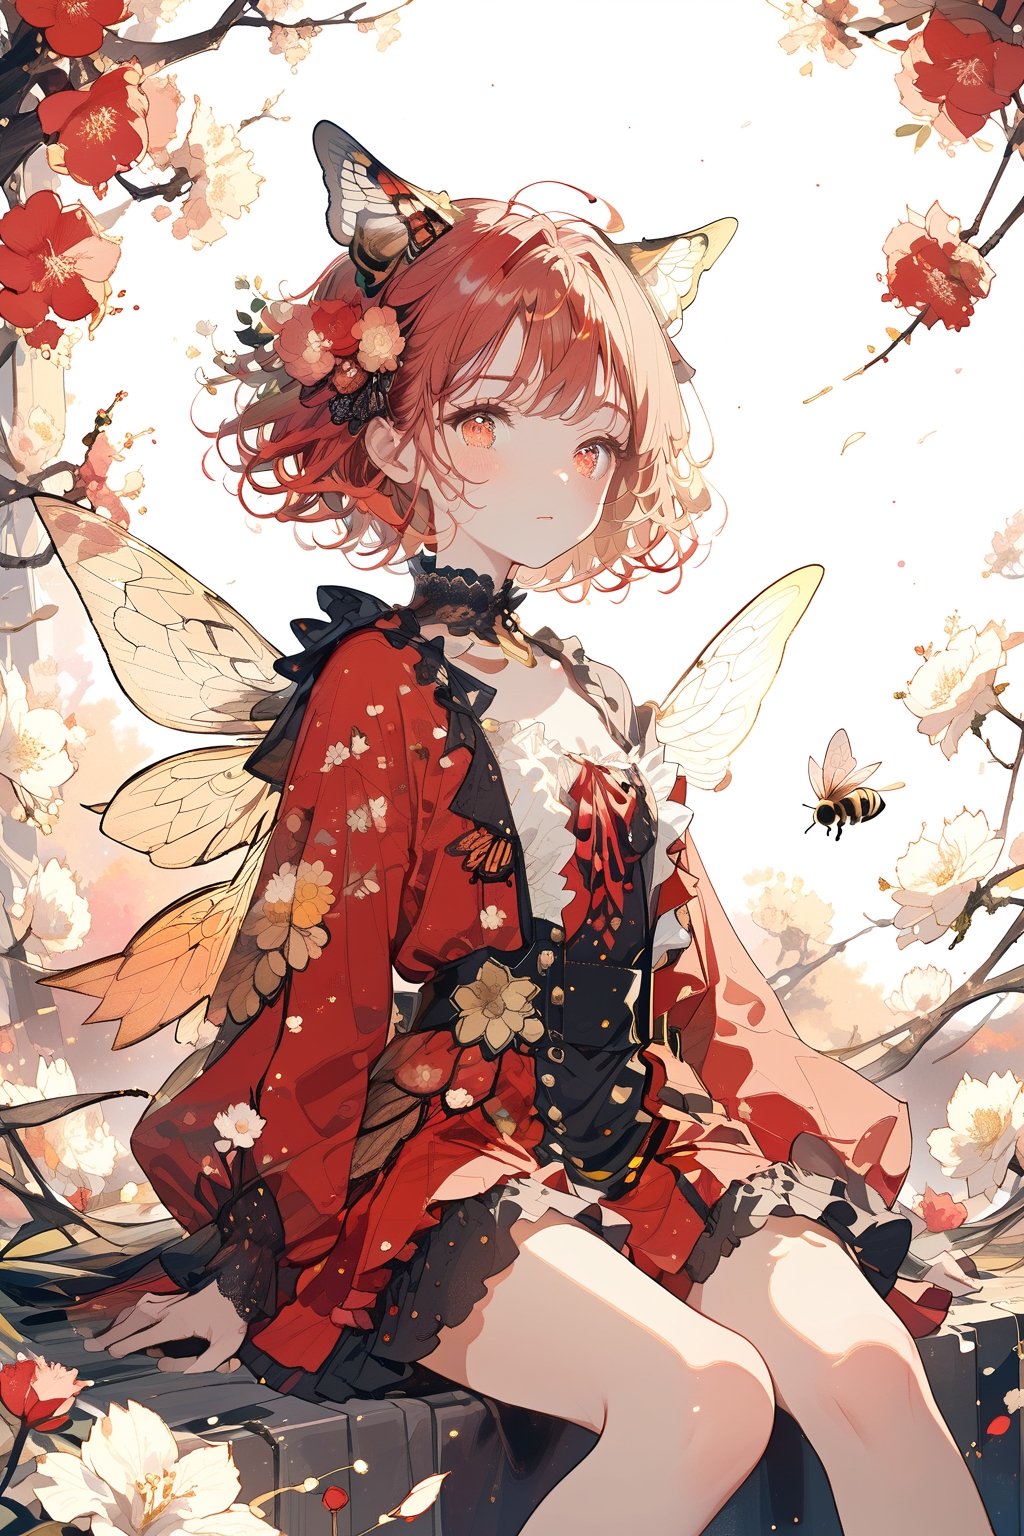 //quality, (masterpiece:1.4), (detailed), ((,best quality,)),//, illustration,,1girl,solo,loli,bee_girl,//, (red hair:1.3), short hair,antenna_hair,sidelocks,hair_flowers, beautiful detailed eyes,glowing eyes,red eyes,//,(sparking bee_wings:1.3),red_dress,
,//, blush,expressionless,looking_at_viewer, first-person_view,//,sitting in flower,//, scenery, outdoors, flower_petals,flying_petals, flowers petals floating in air,((bees)), (straight-on:1.3),//,emo,aesthetic,Flower queen